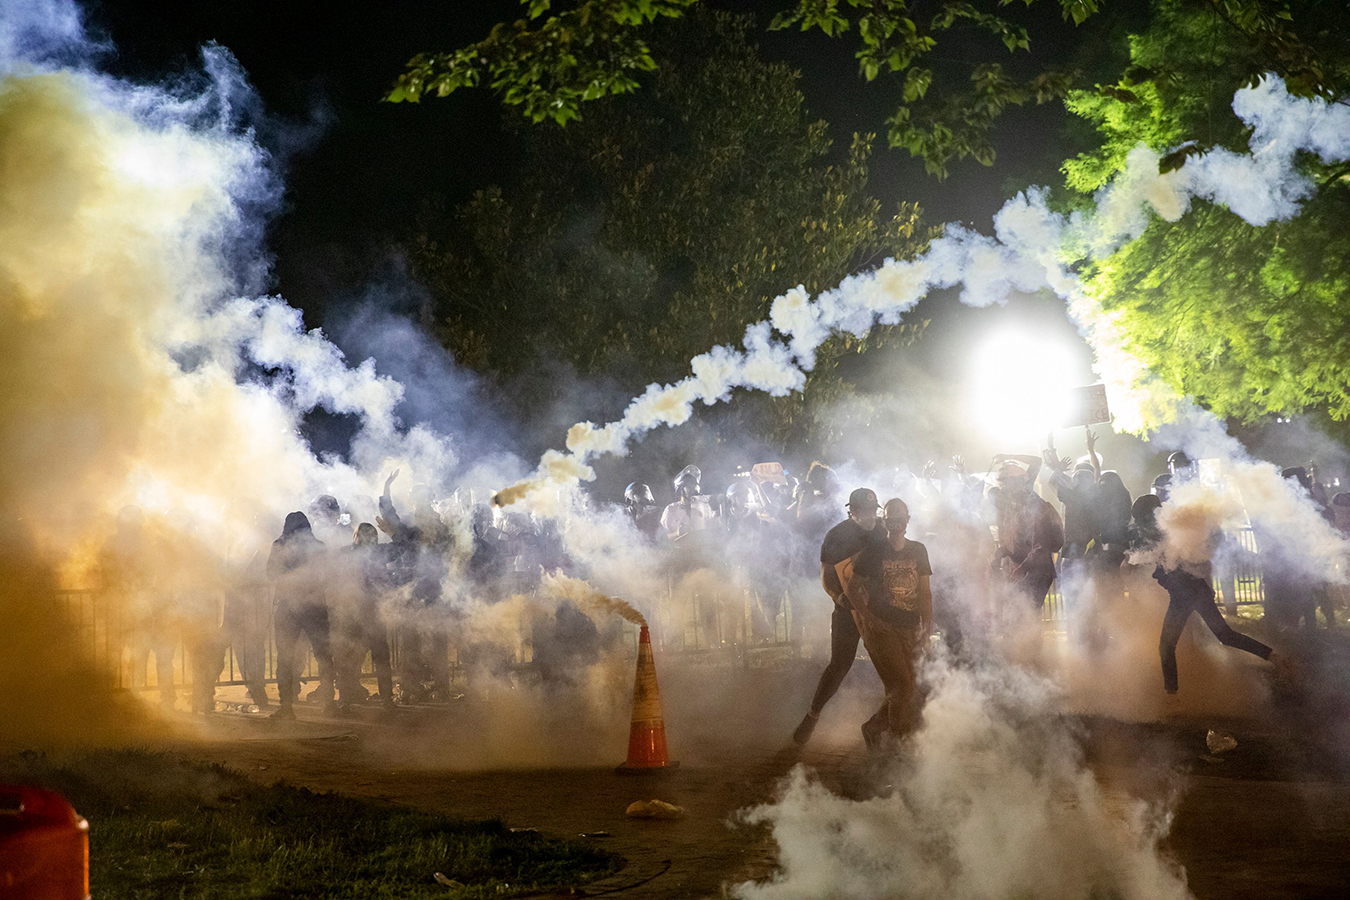 Tear-Gassing Protesters During An Infectious Outbreak ‘A Recipe For Disaster’